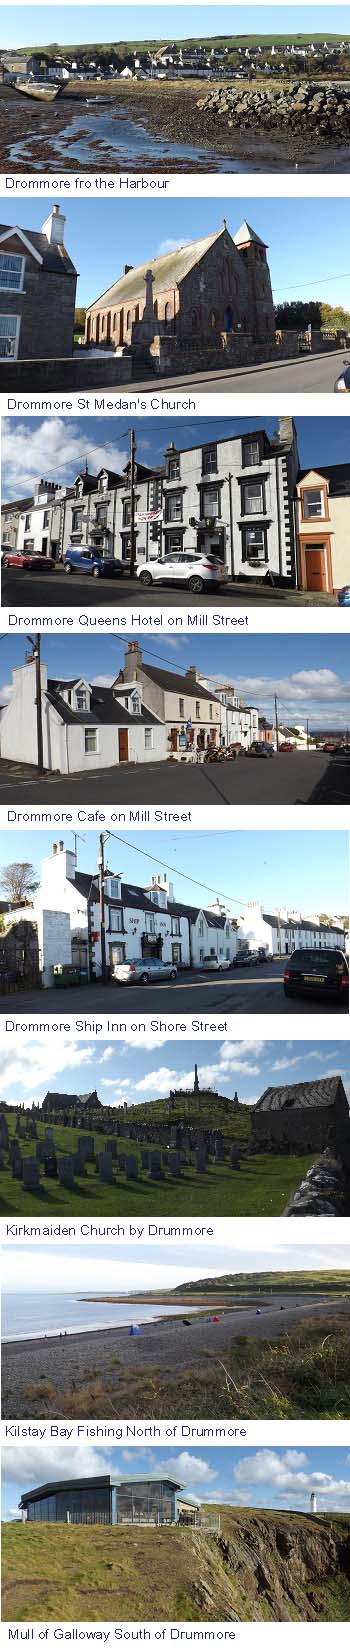 Drummore Images